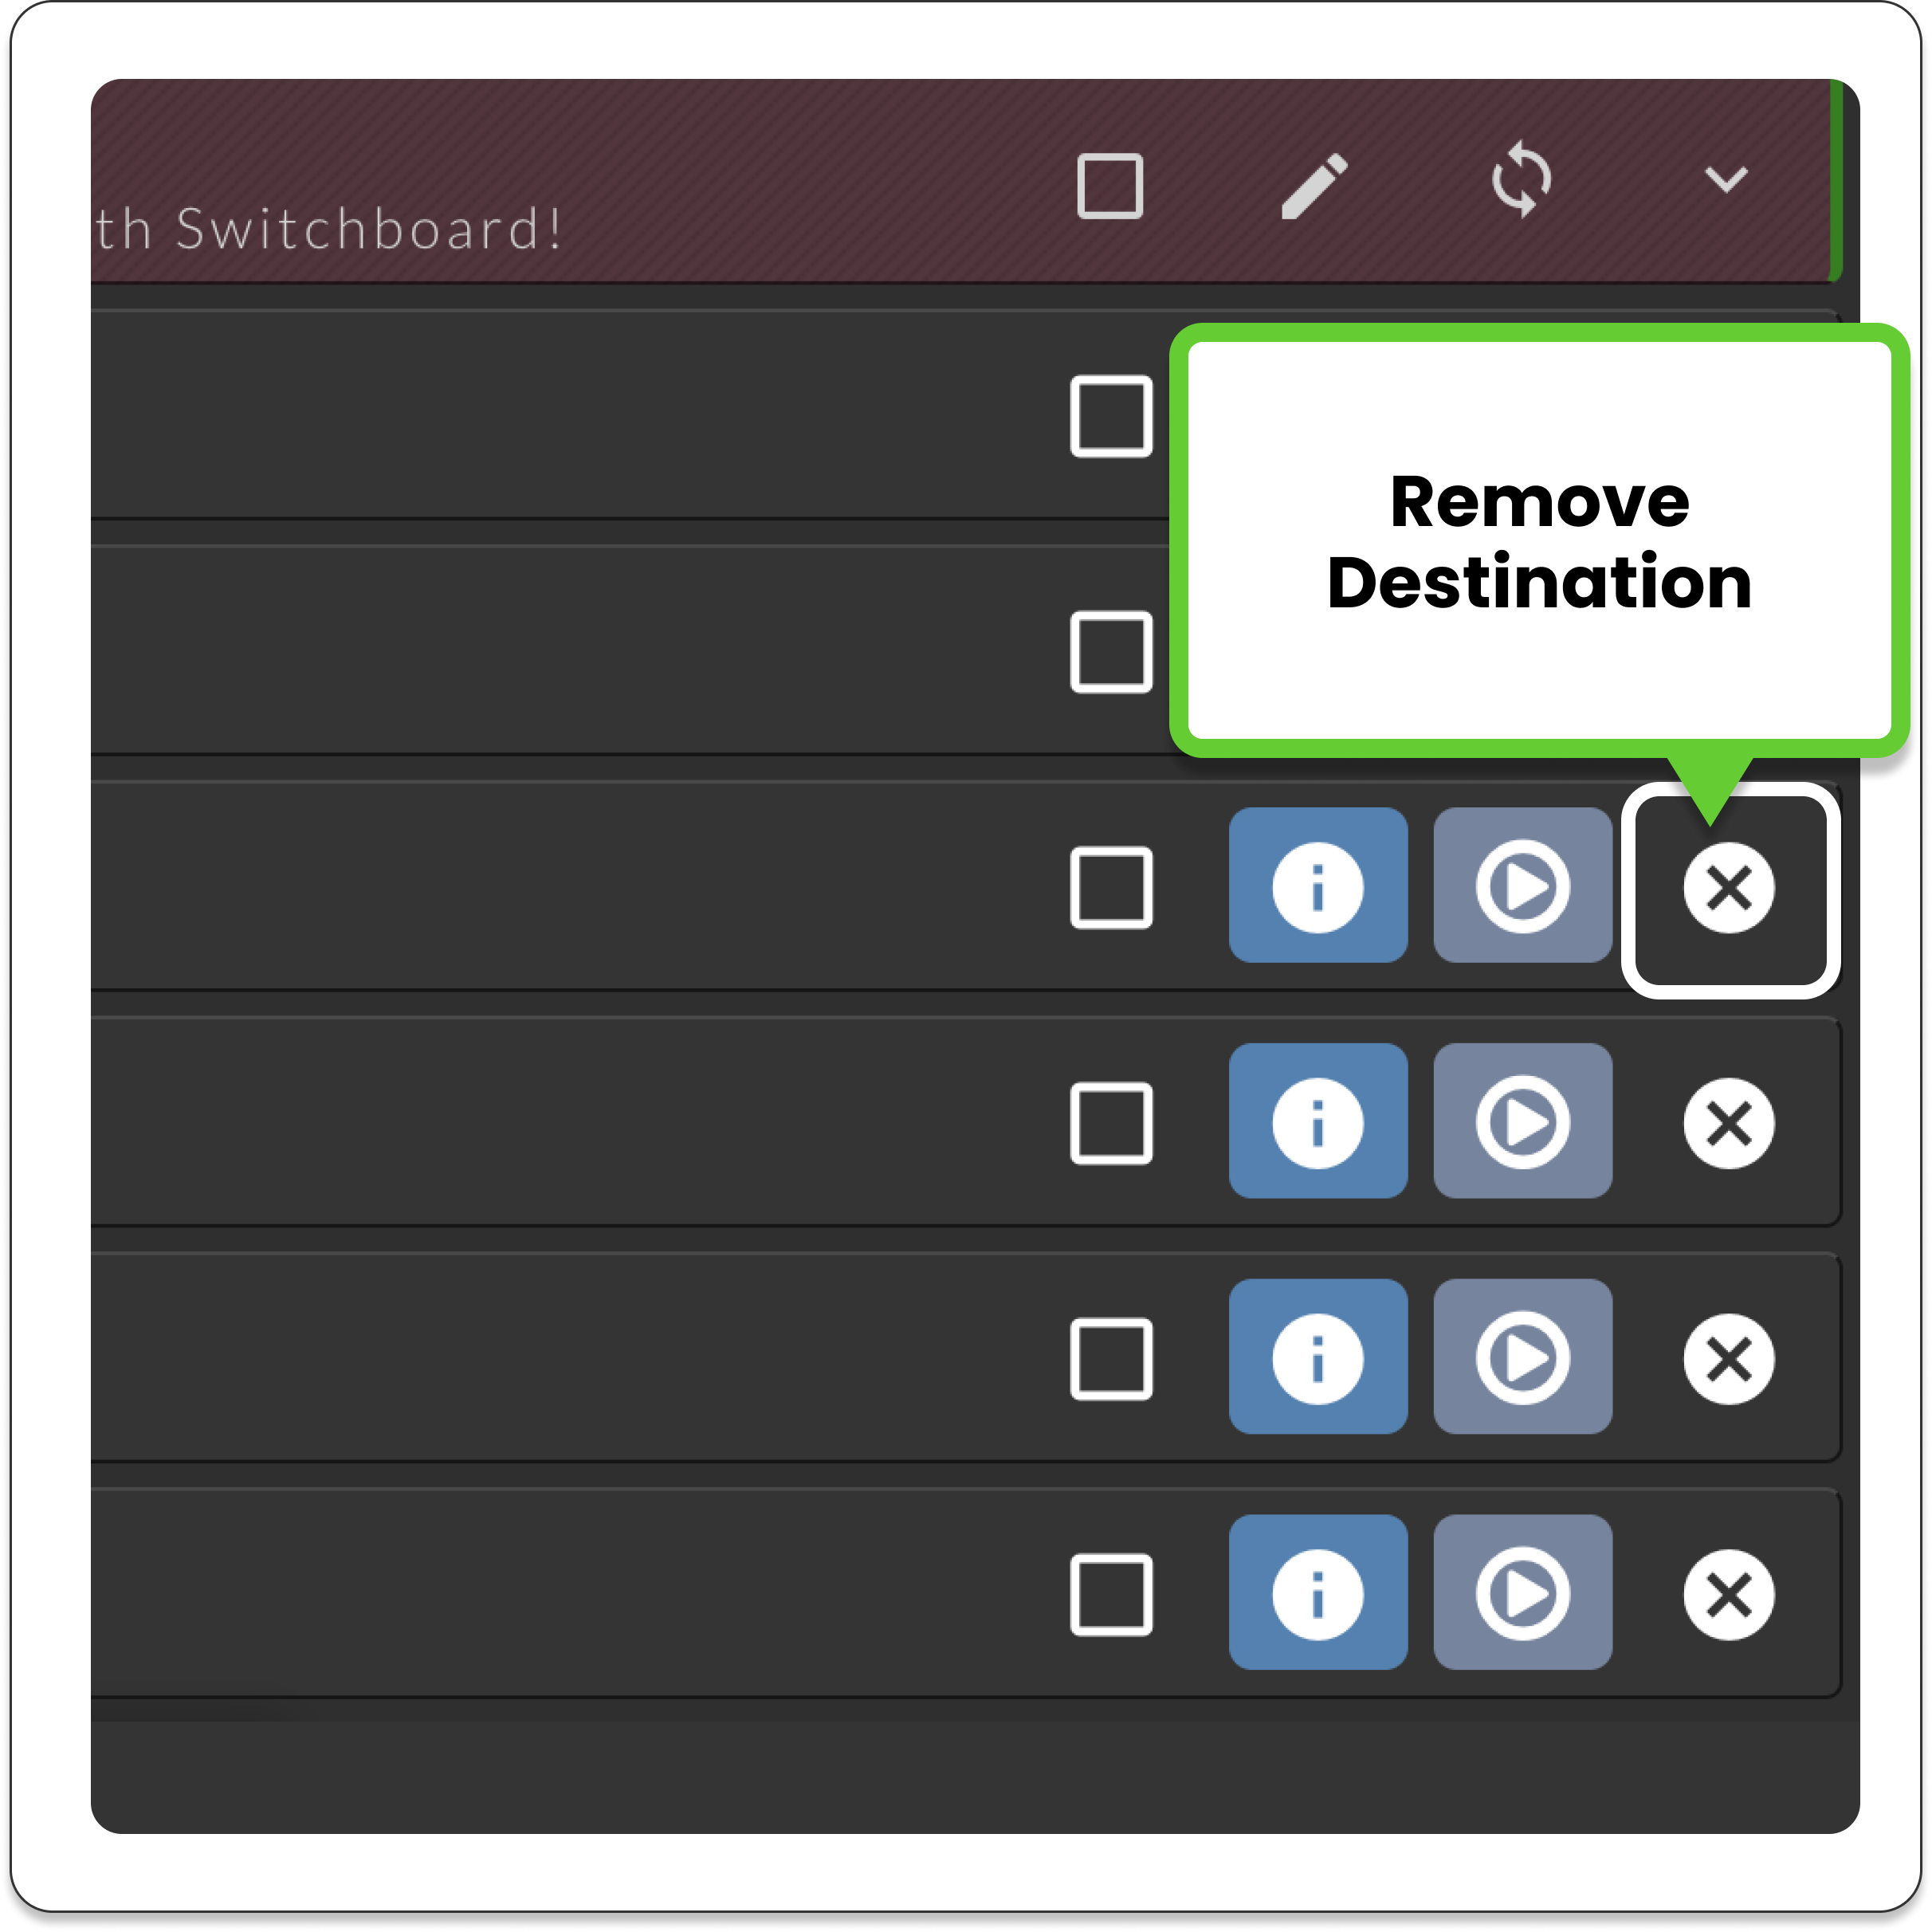 switchboardlive_workflow-page_destinations_pane_destination_remove_destination.png